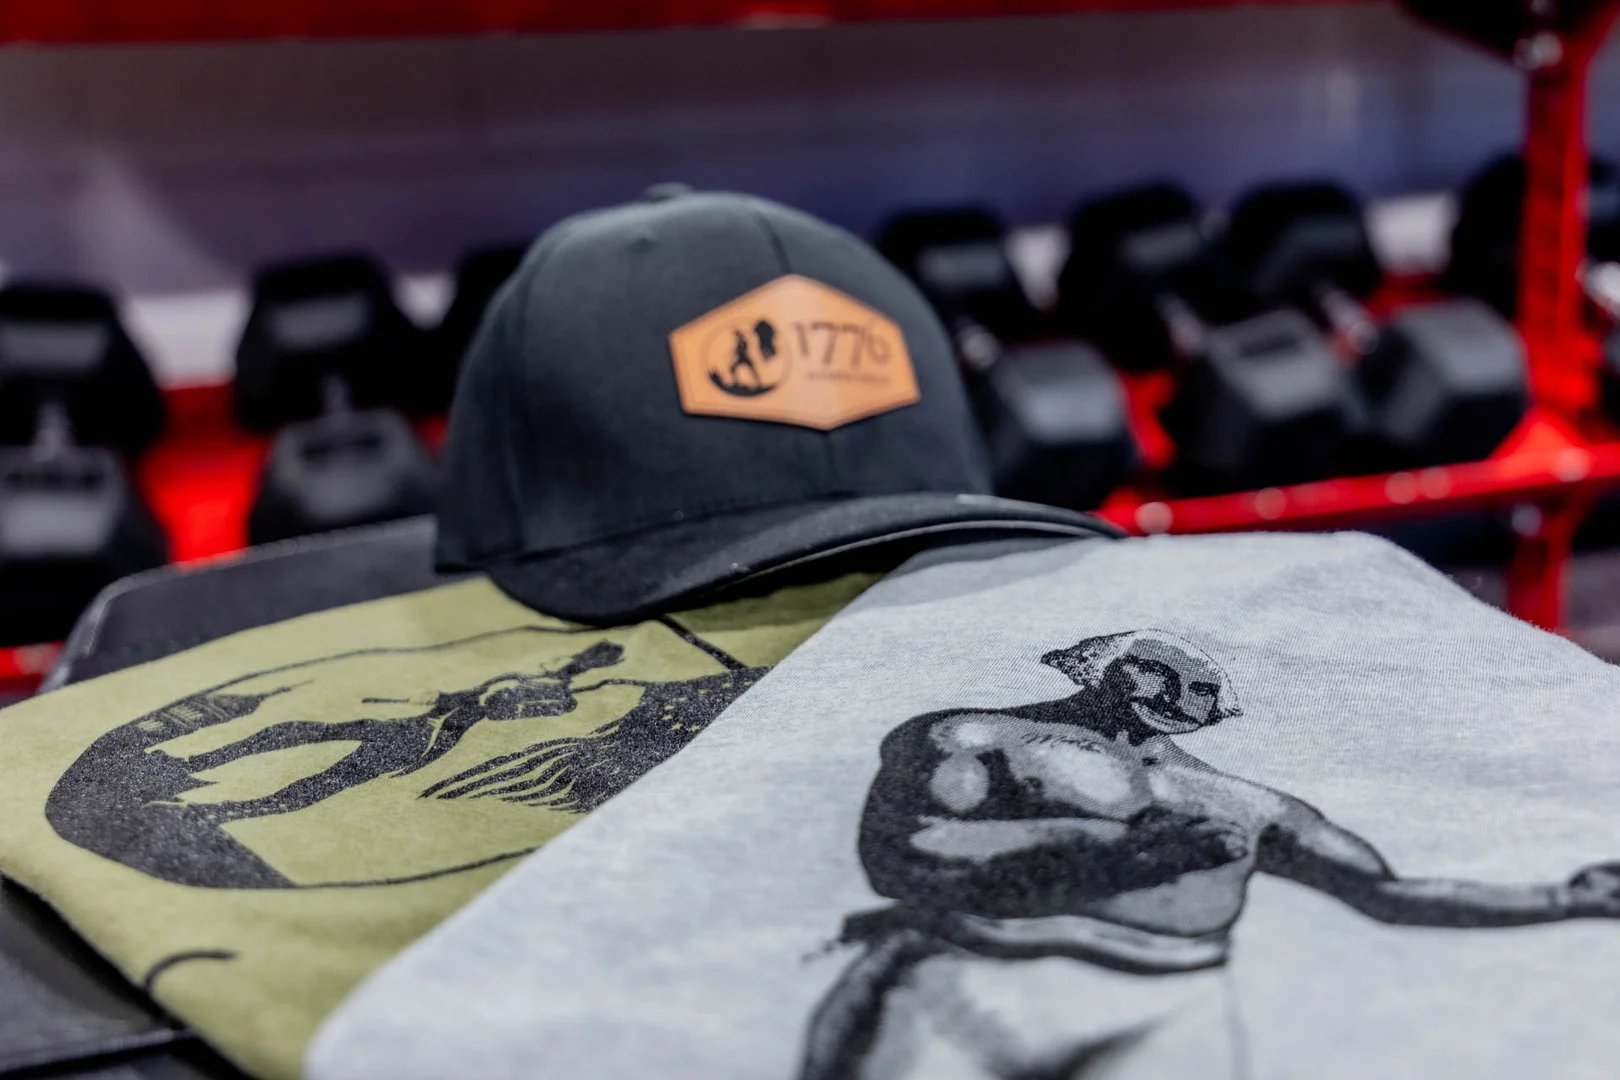 1776 Fitness Group hat and Shirt Merch